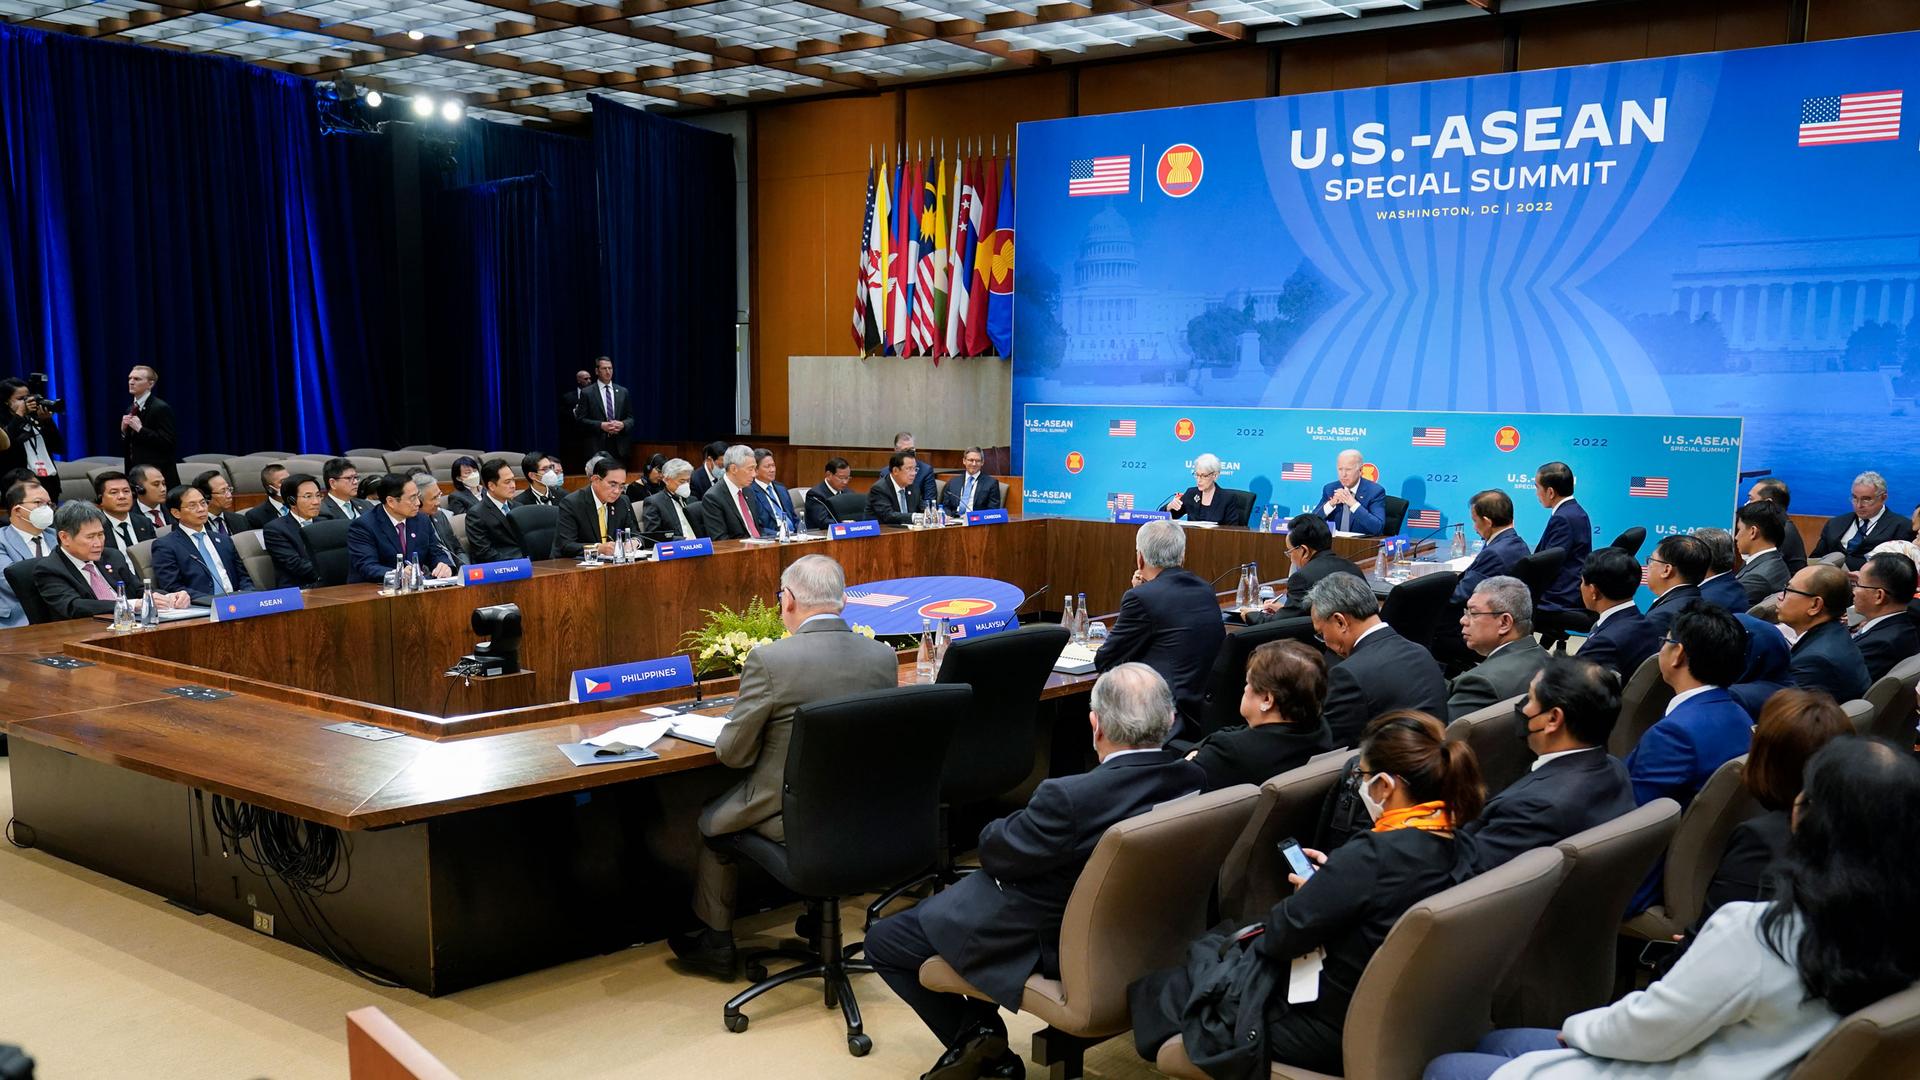 President Joe Biden participates in the US-ASEAN Special Summit to commemorate 45 years of US-ASEAN relations at the State Department in Washington, Friday, May 13, 2022.